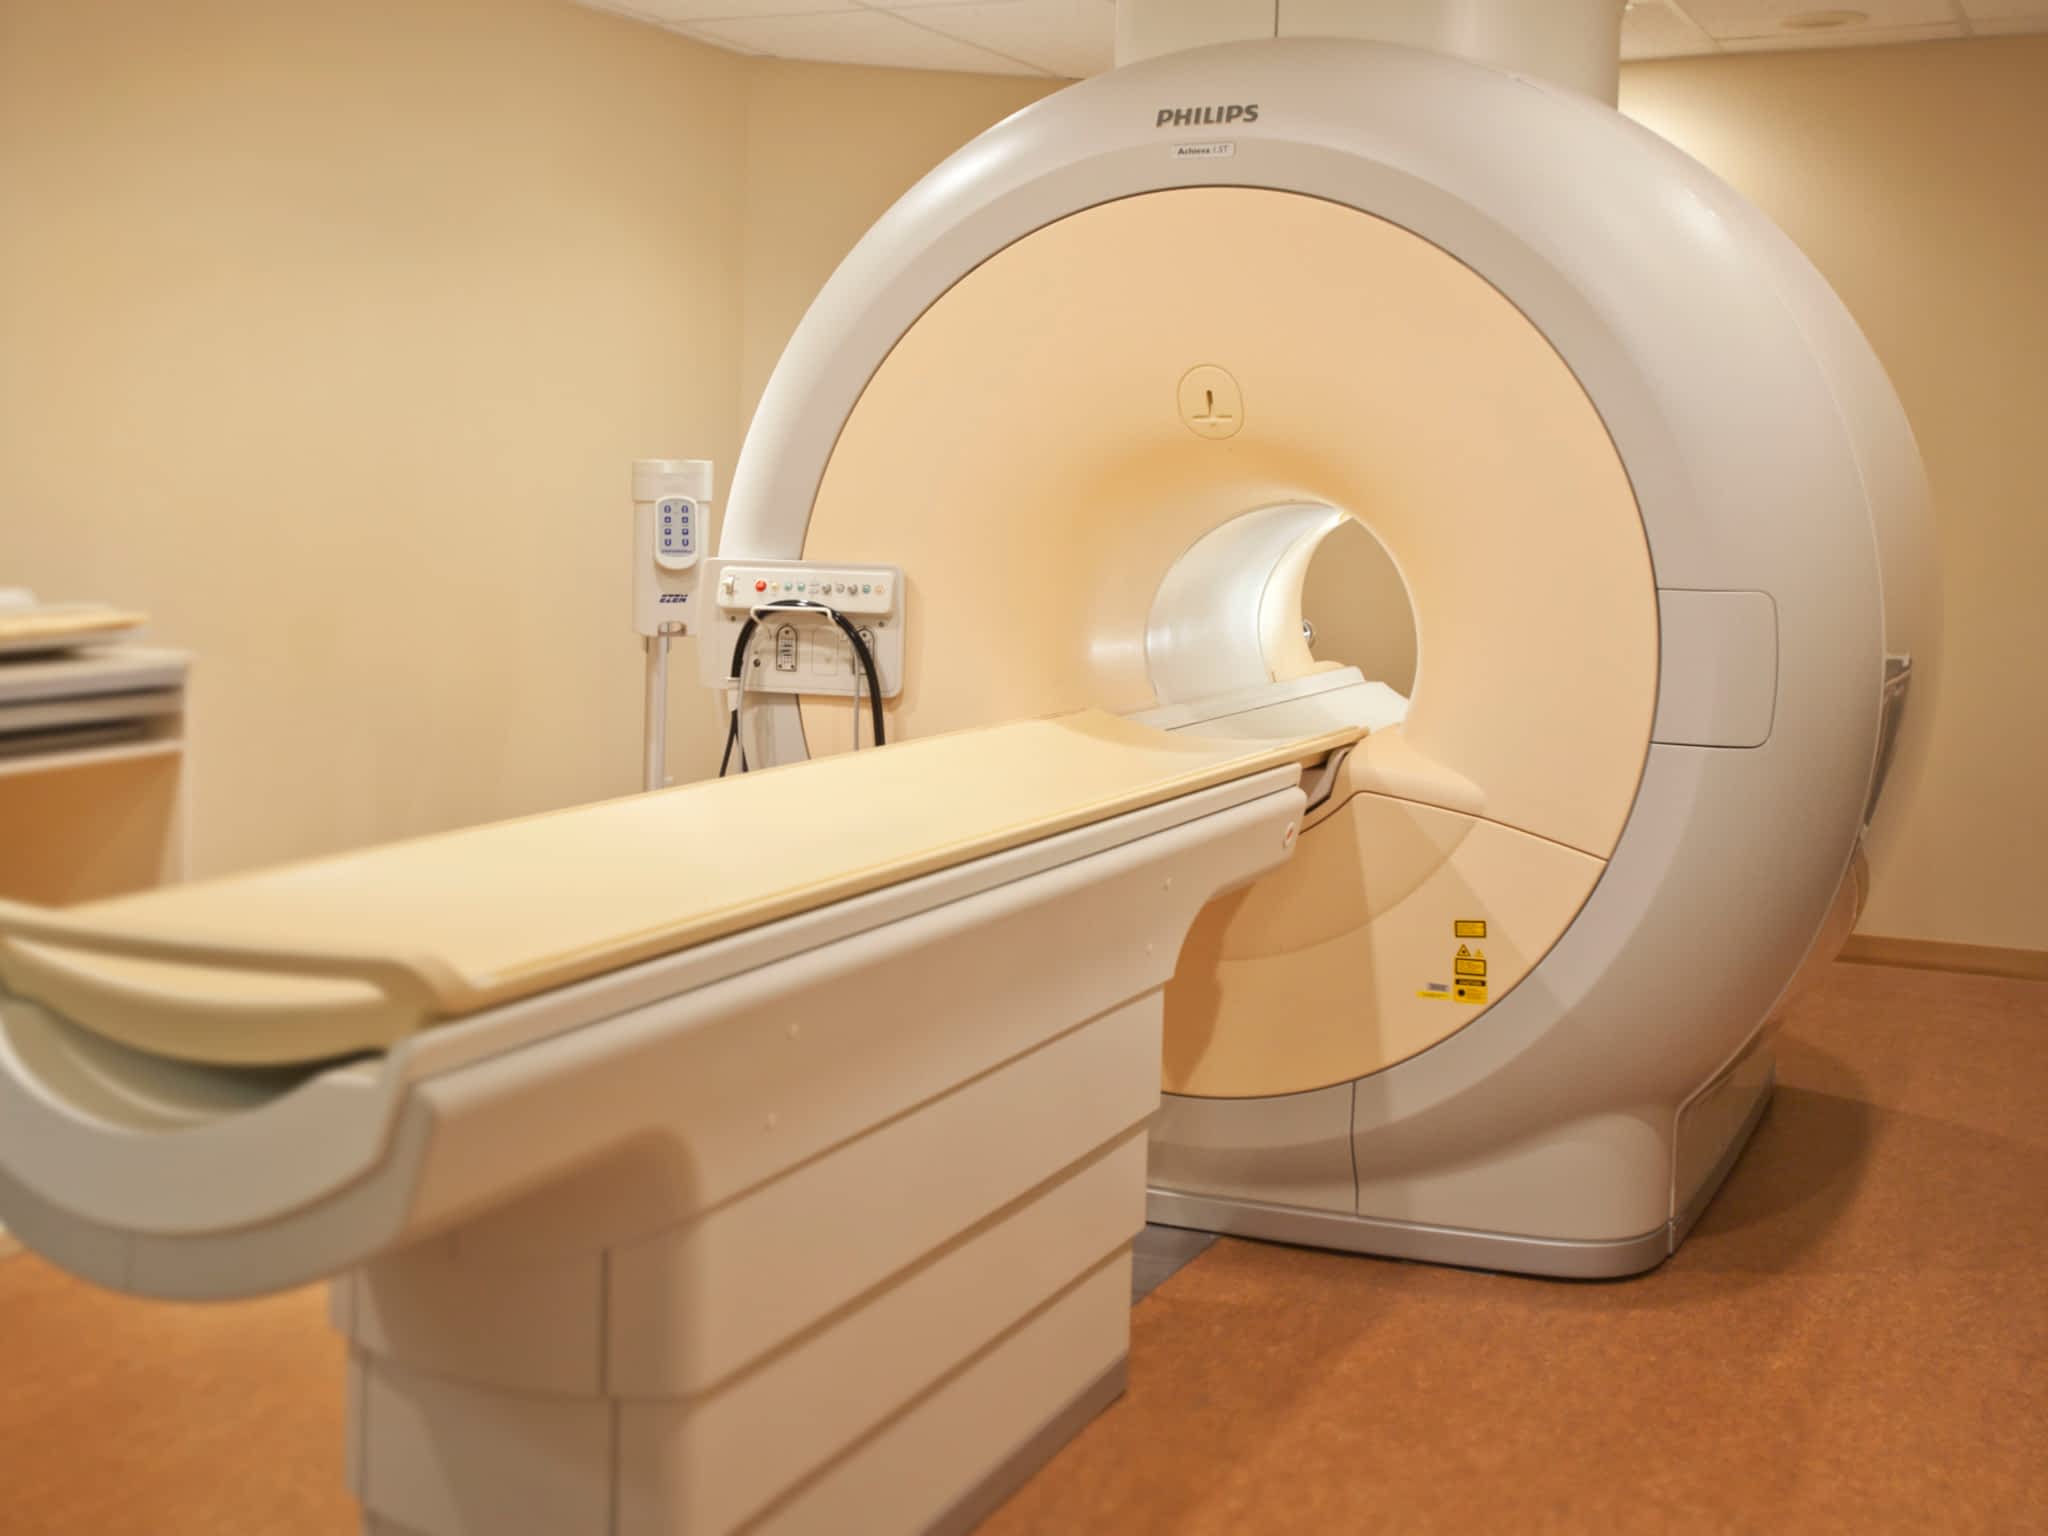 photo Imagix - Radiologie Châteauguay